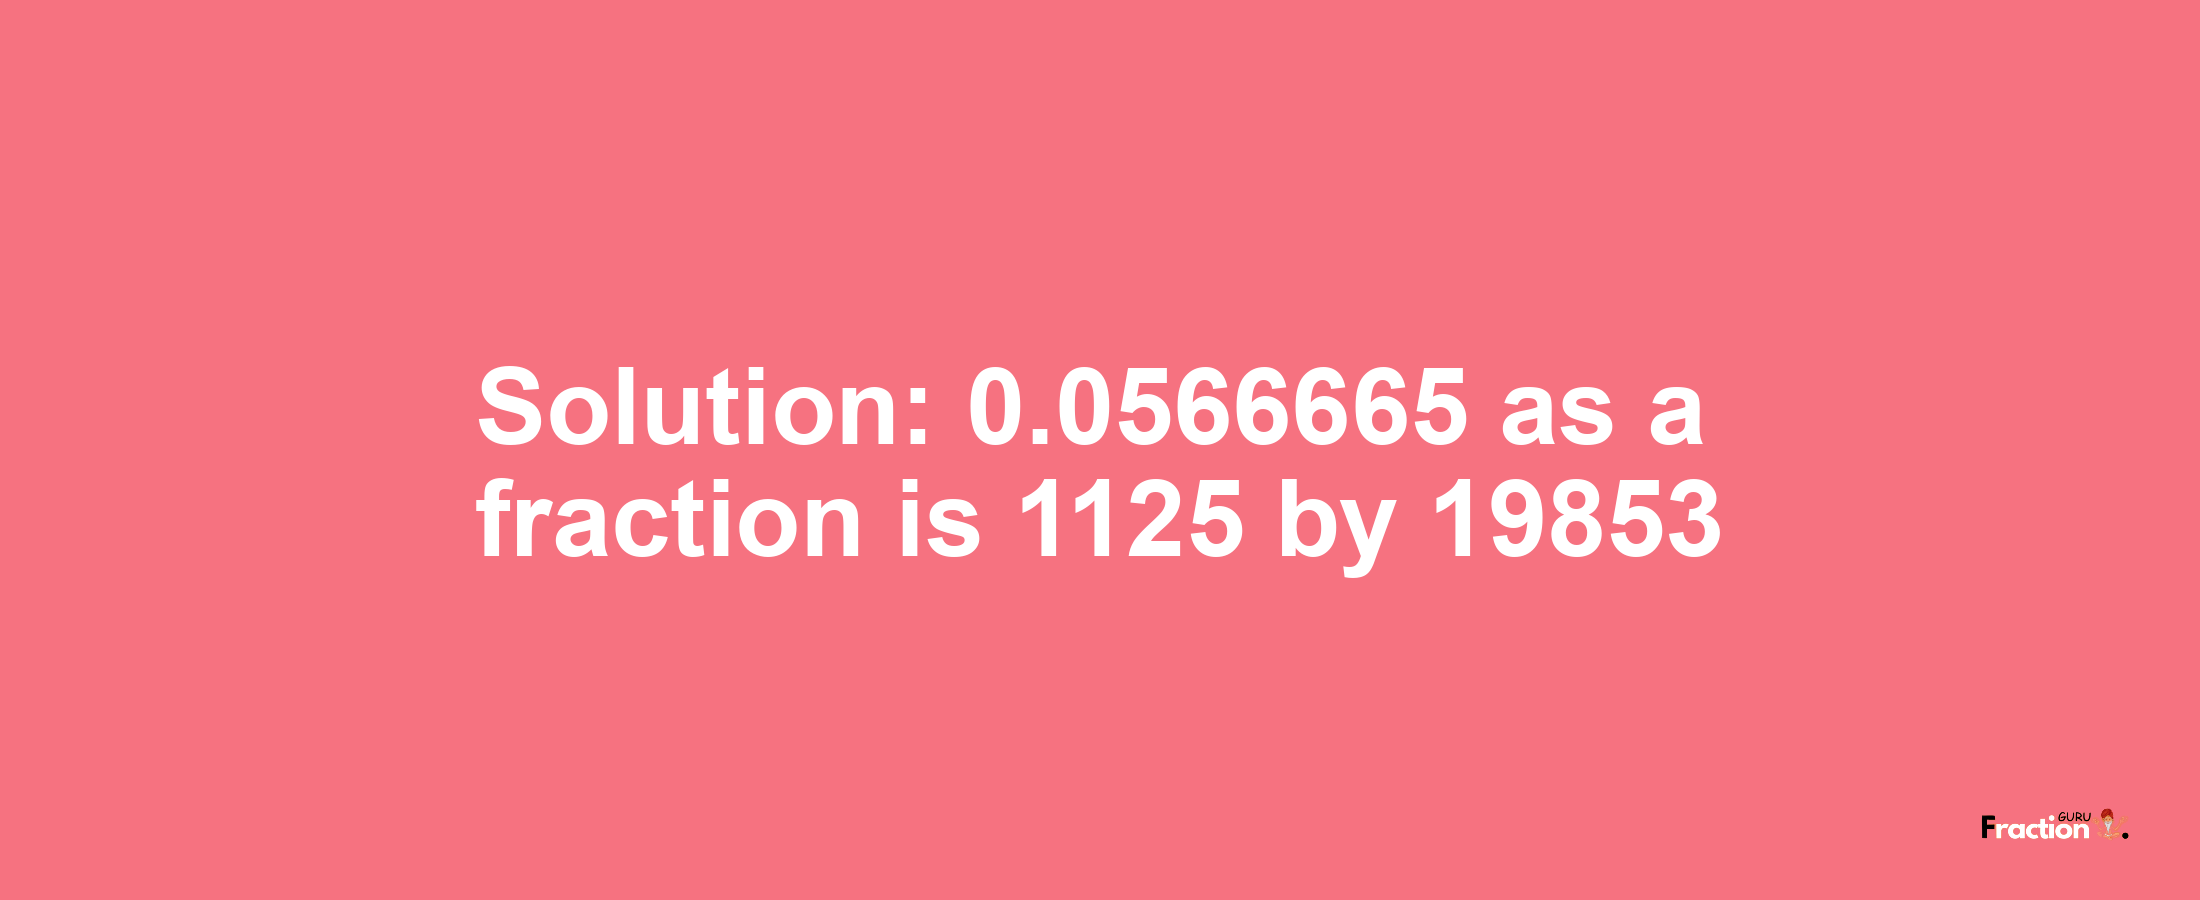 Solution:0.0566665 as a fraction is 1125/19853